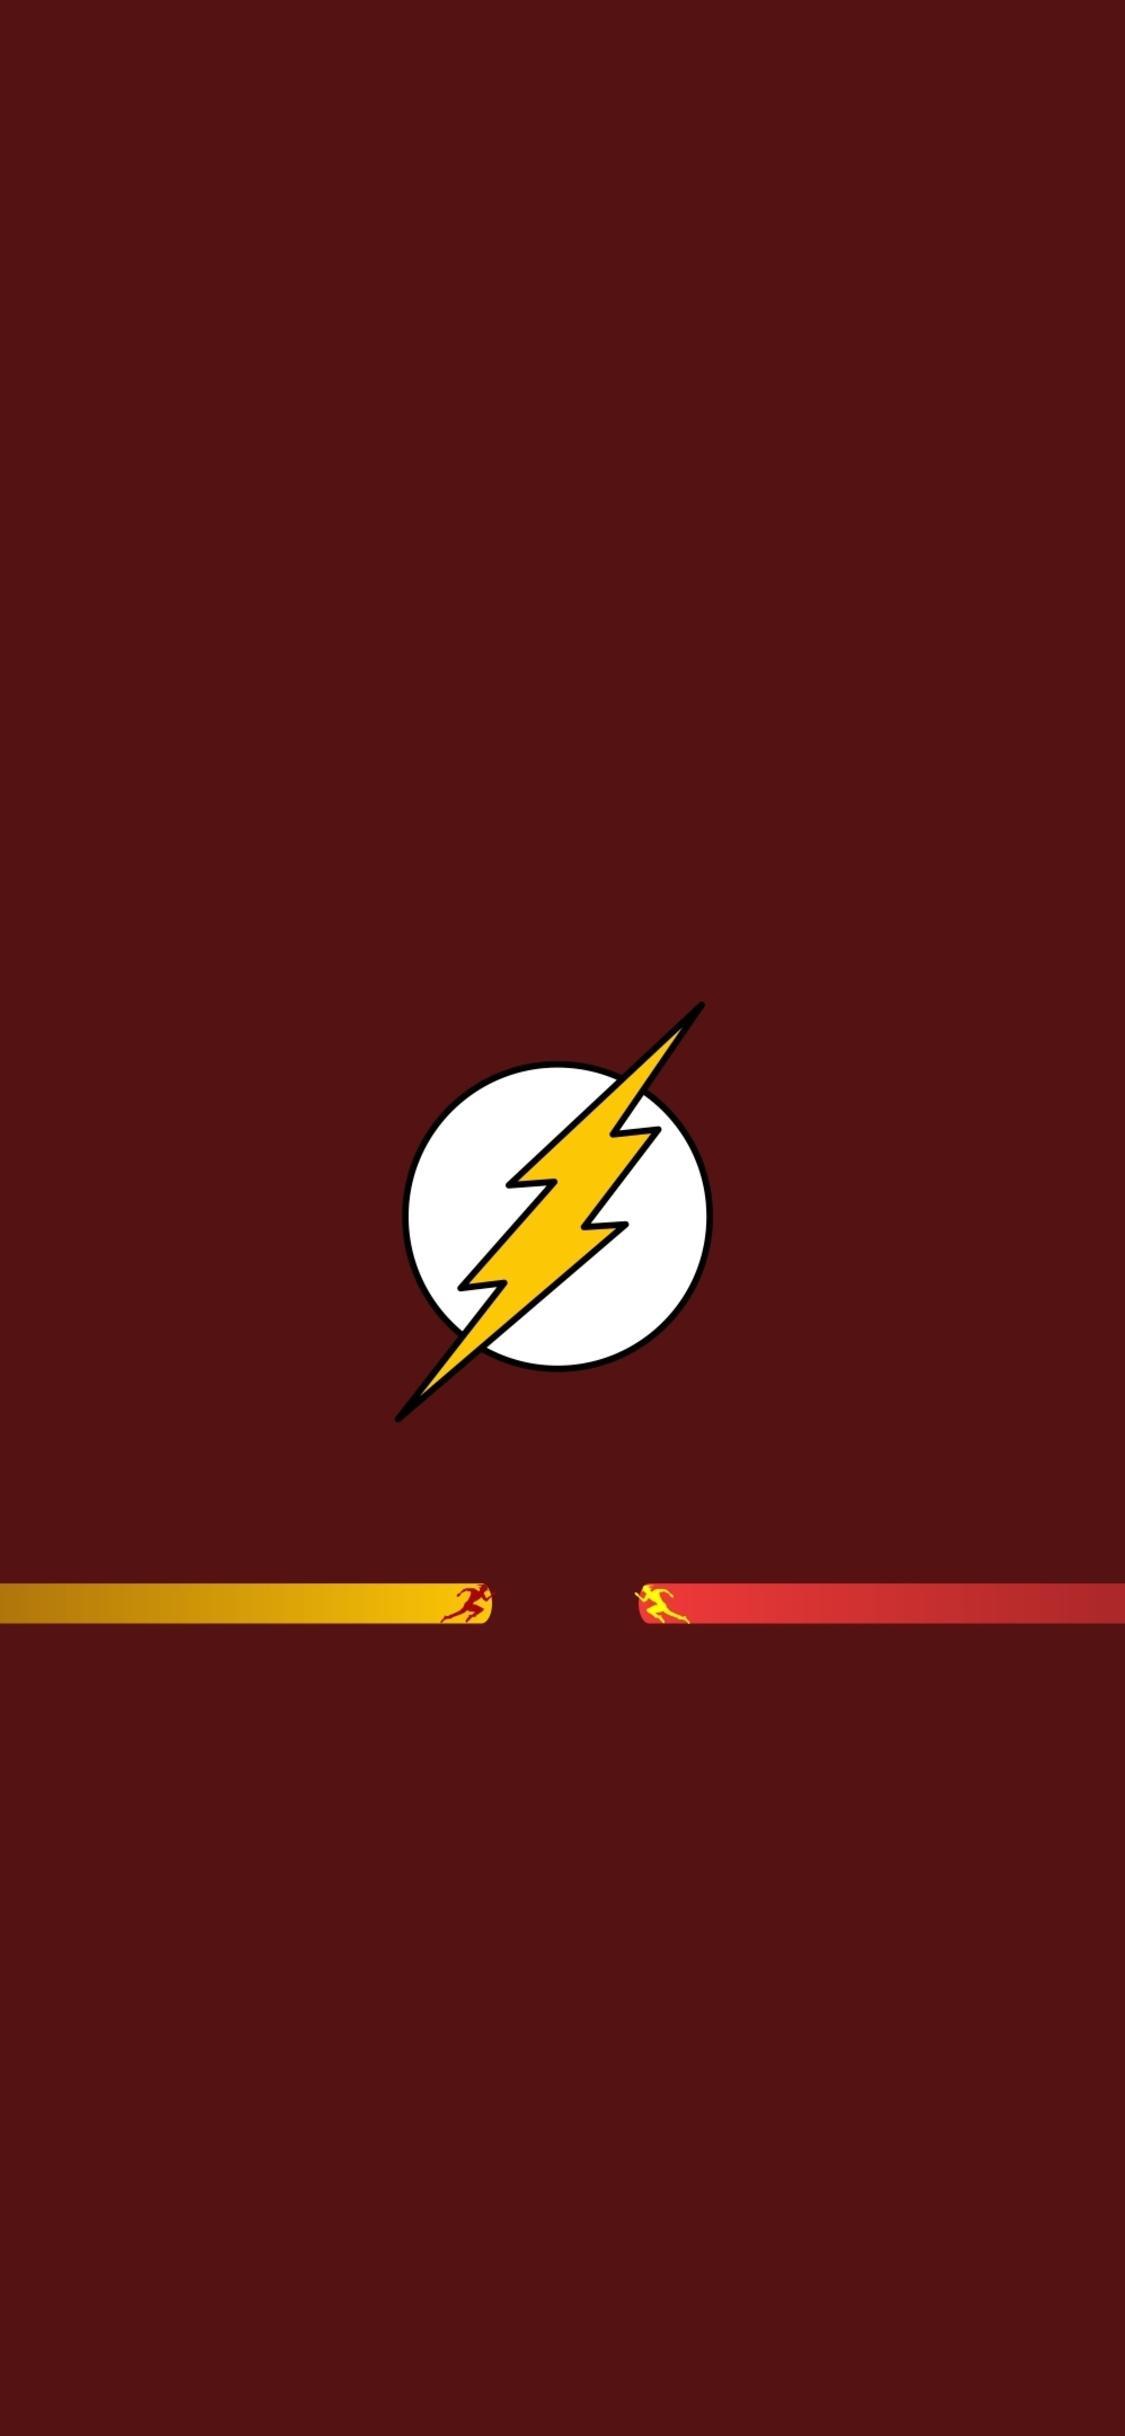 Flashing The Flash Tap to see more Barry Allen The Flash iPhone iPad   Android wallpapers backgrounds fondos